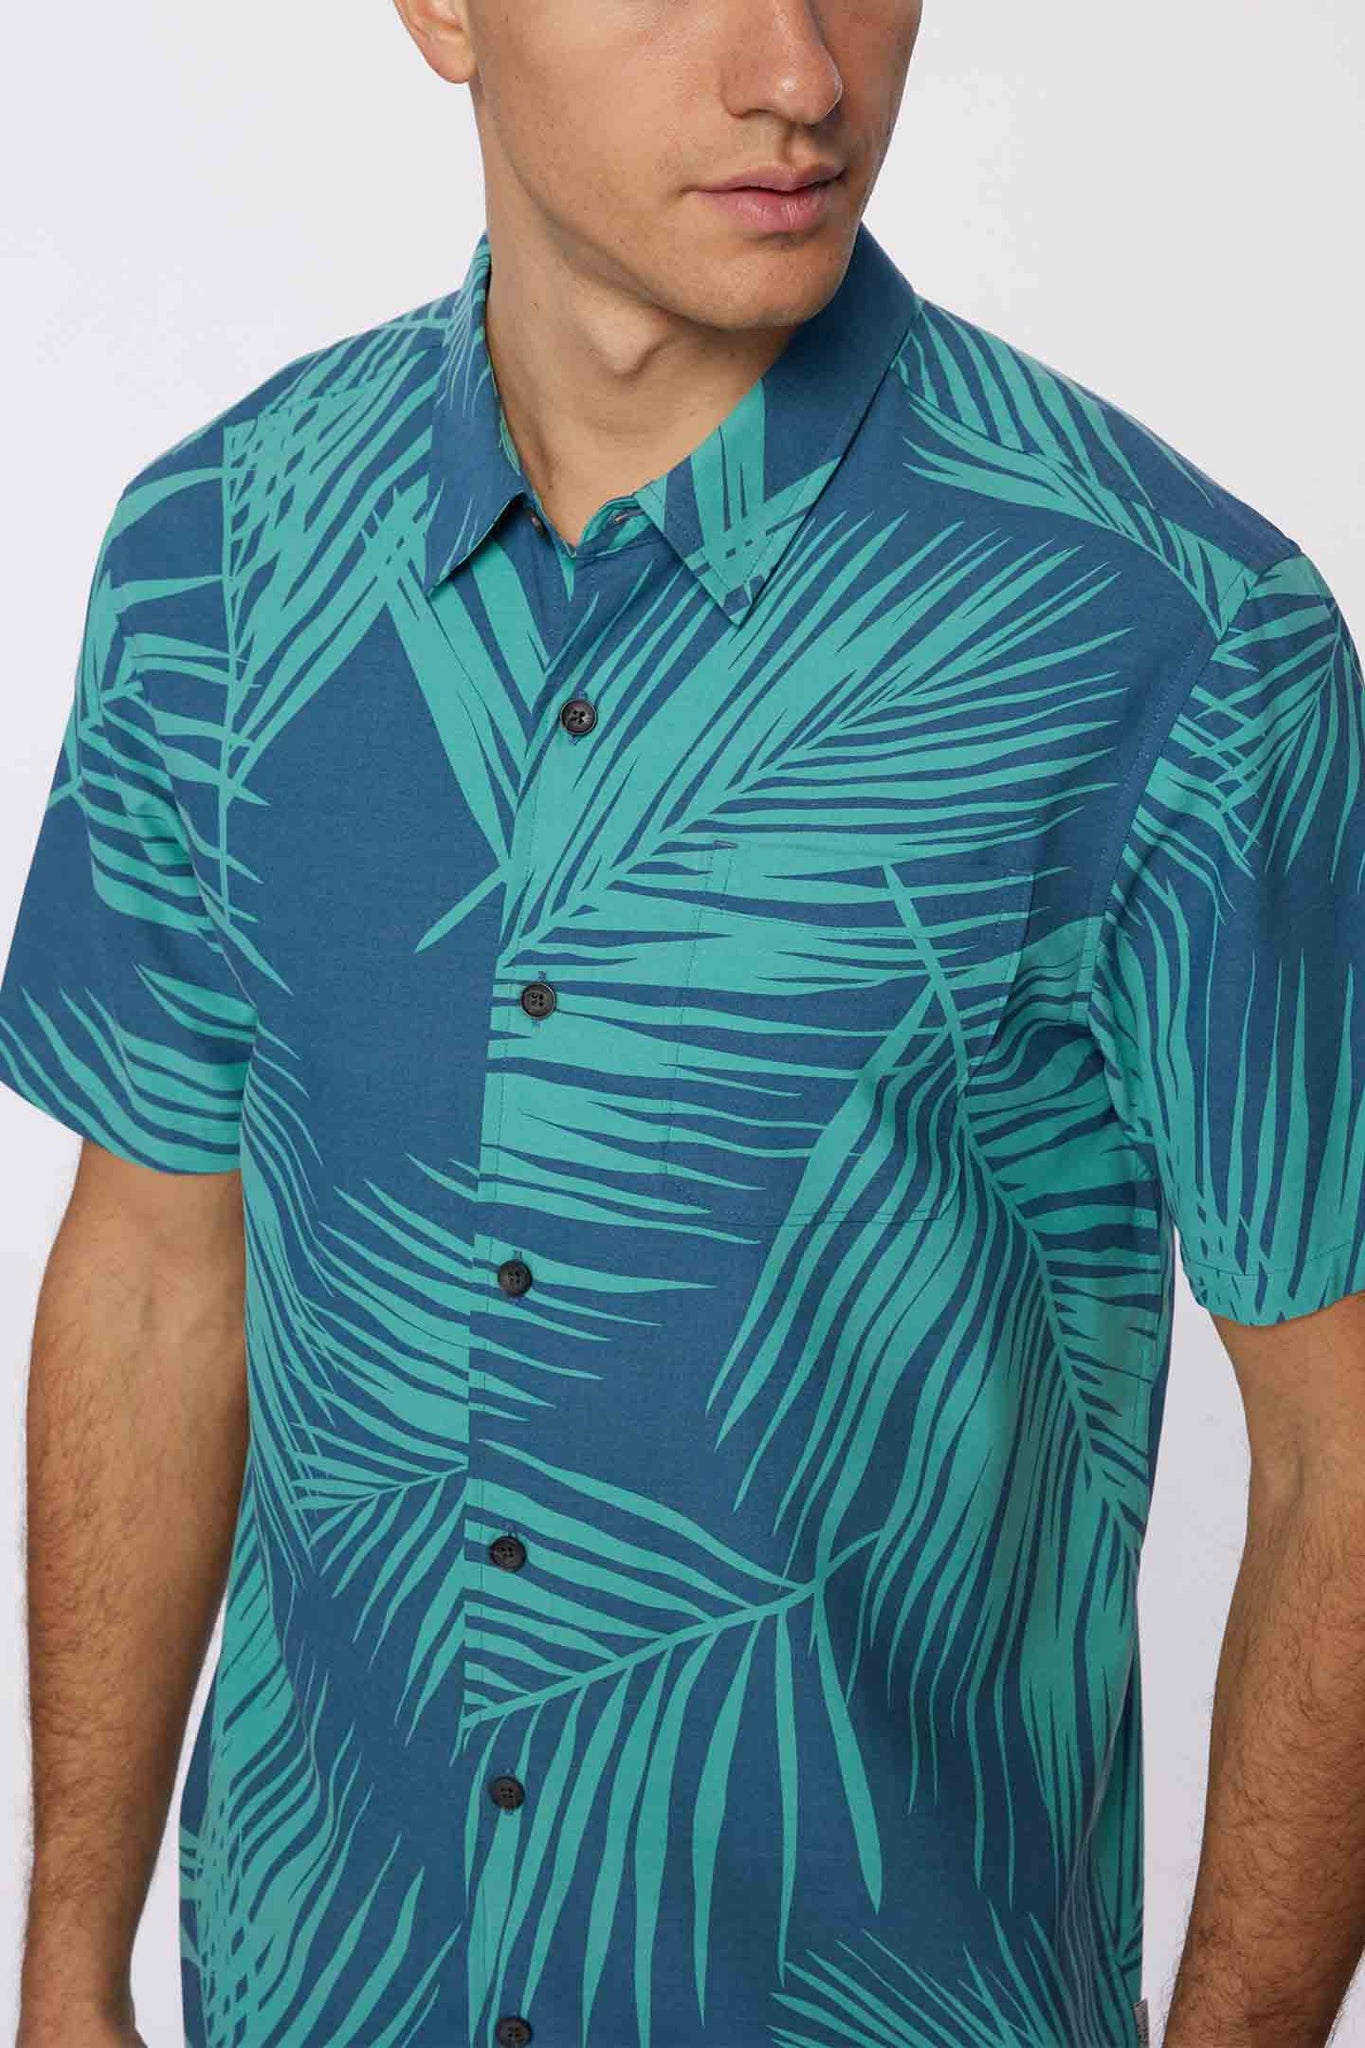 JACK O'NEILL FRONDS RELAXED FIT SHIRT